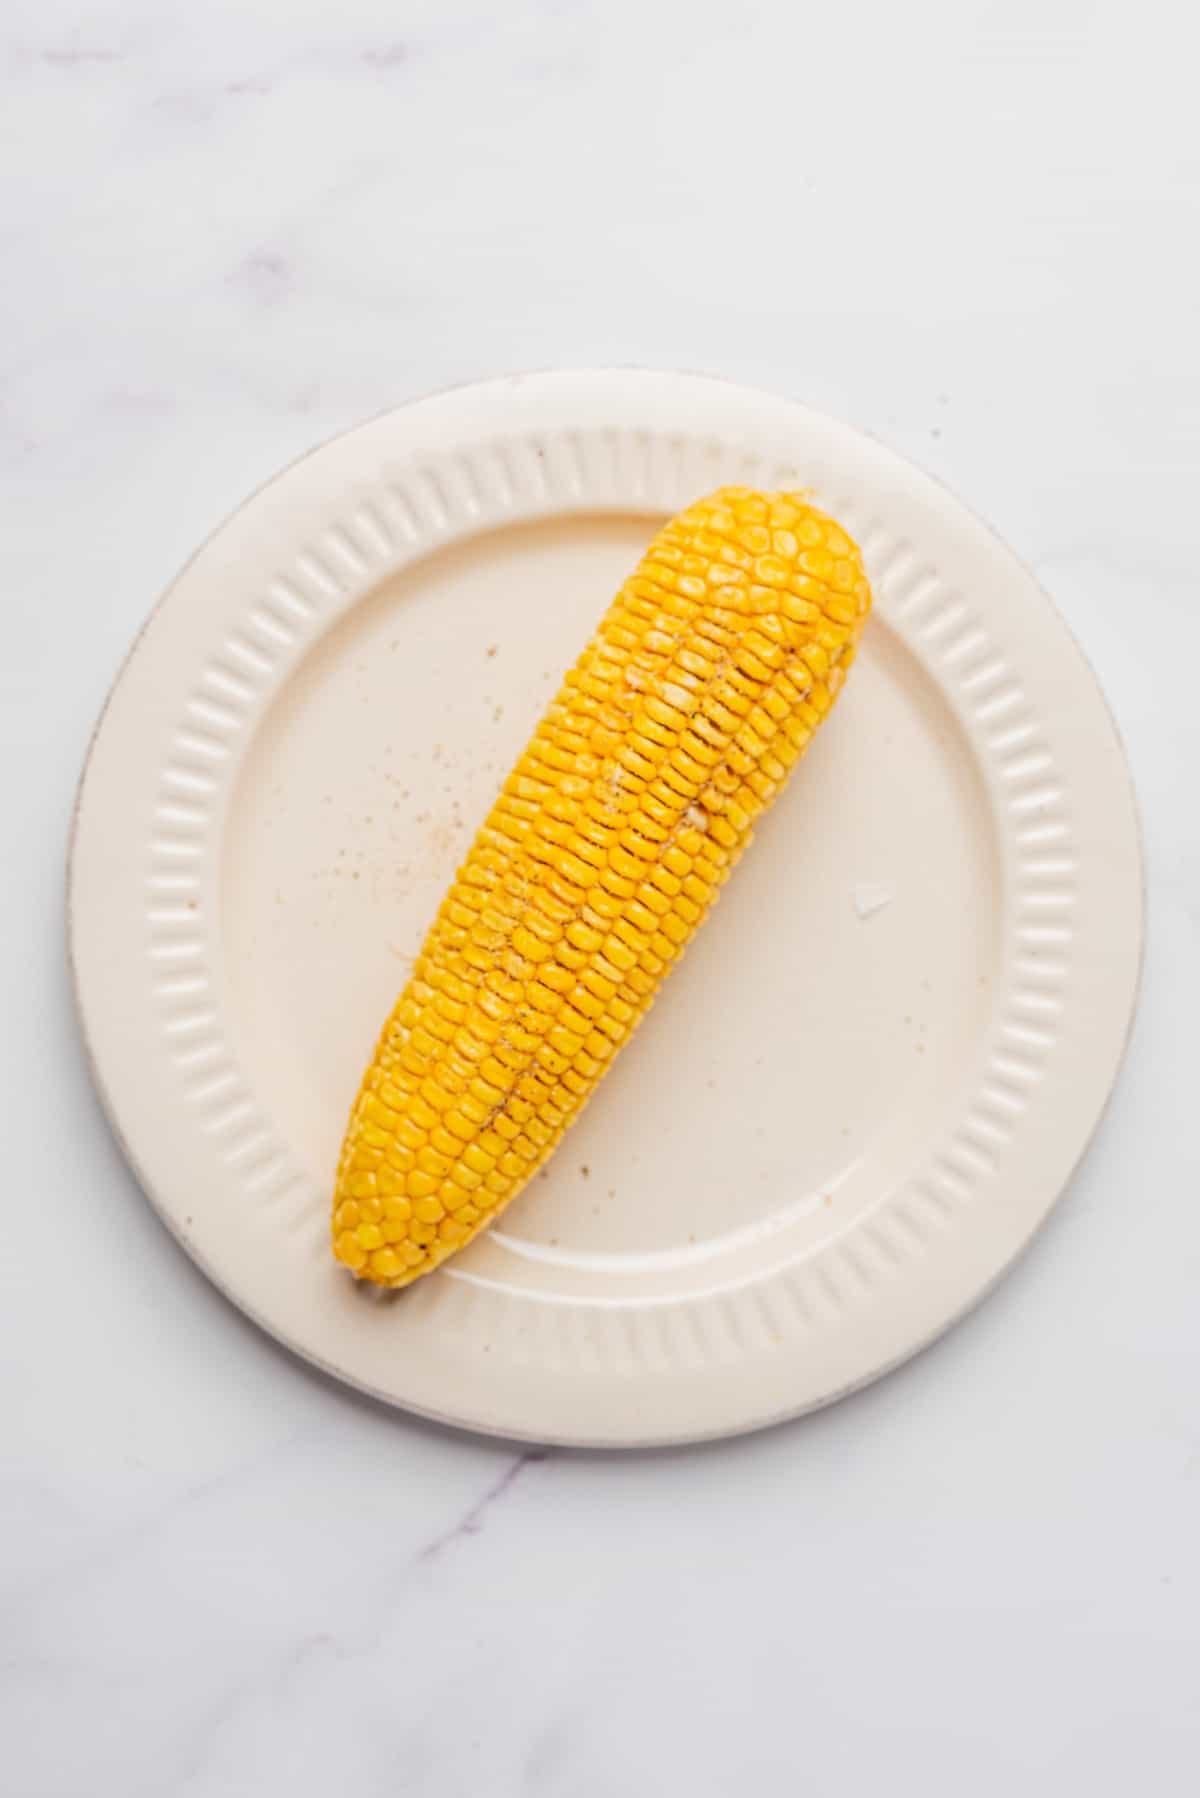 An image of a corn on a microwave-safe dish